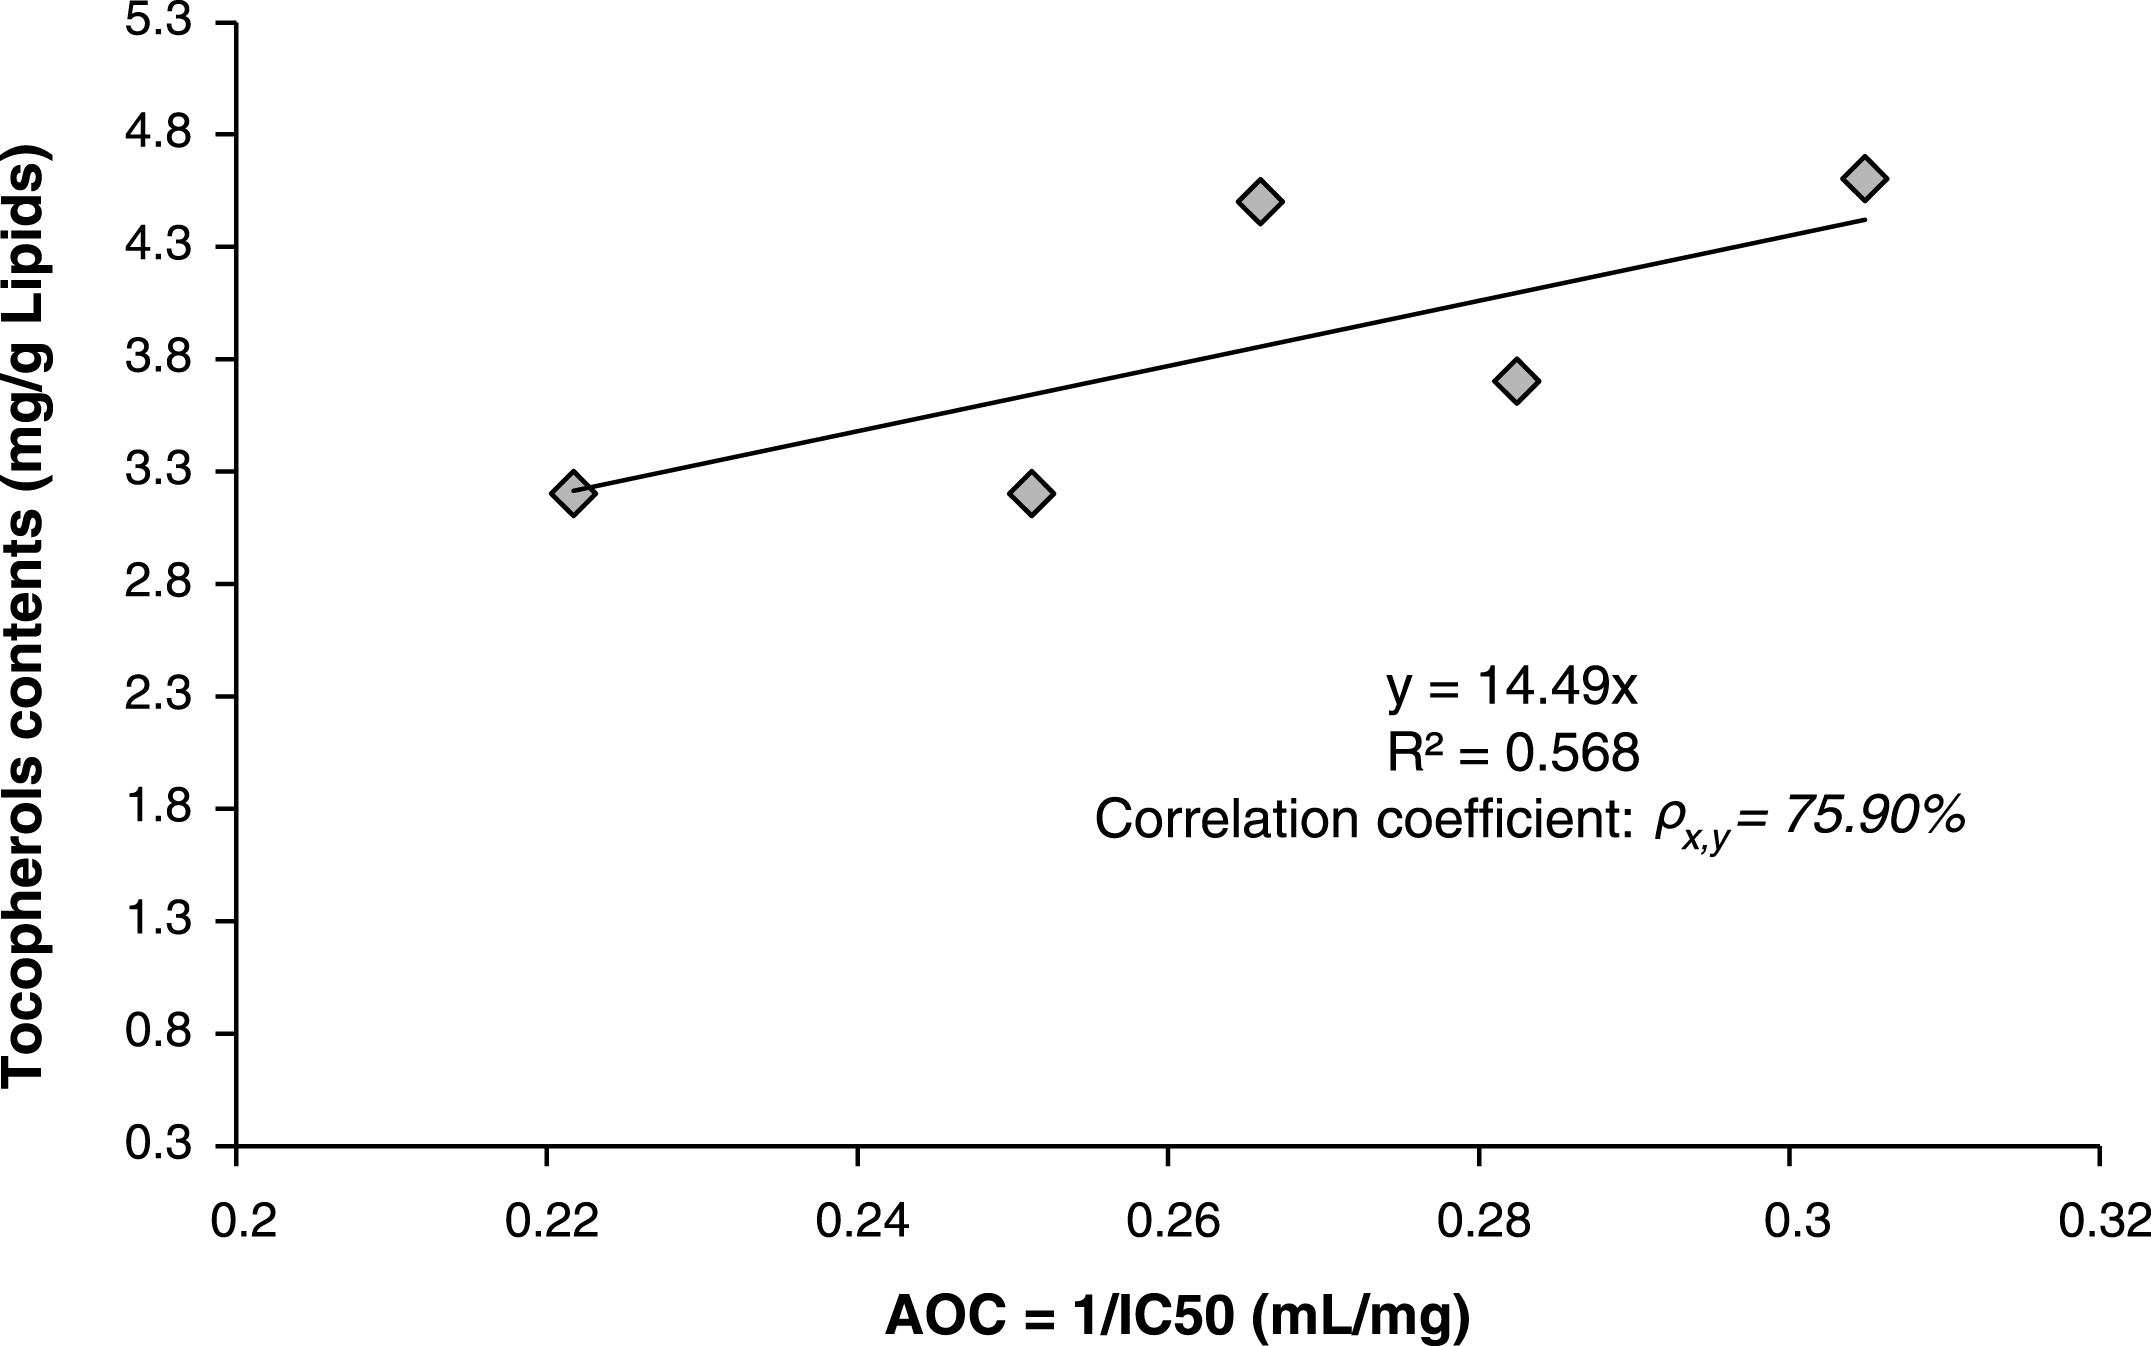 Linear correlation between antioxidant activity (Antioxidant capacity AOC) and total contents of tocopherols in the lipids of Pistacia lentiscus leaves.